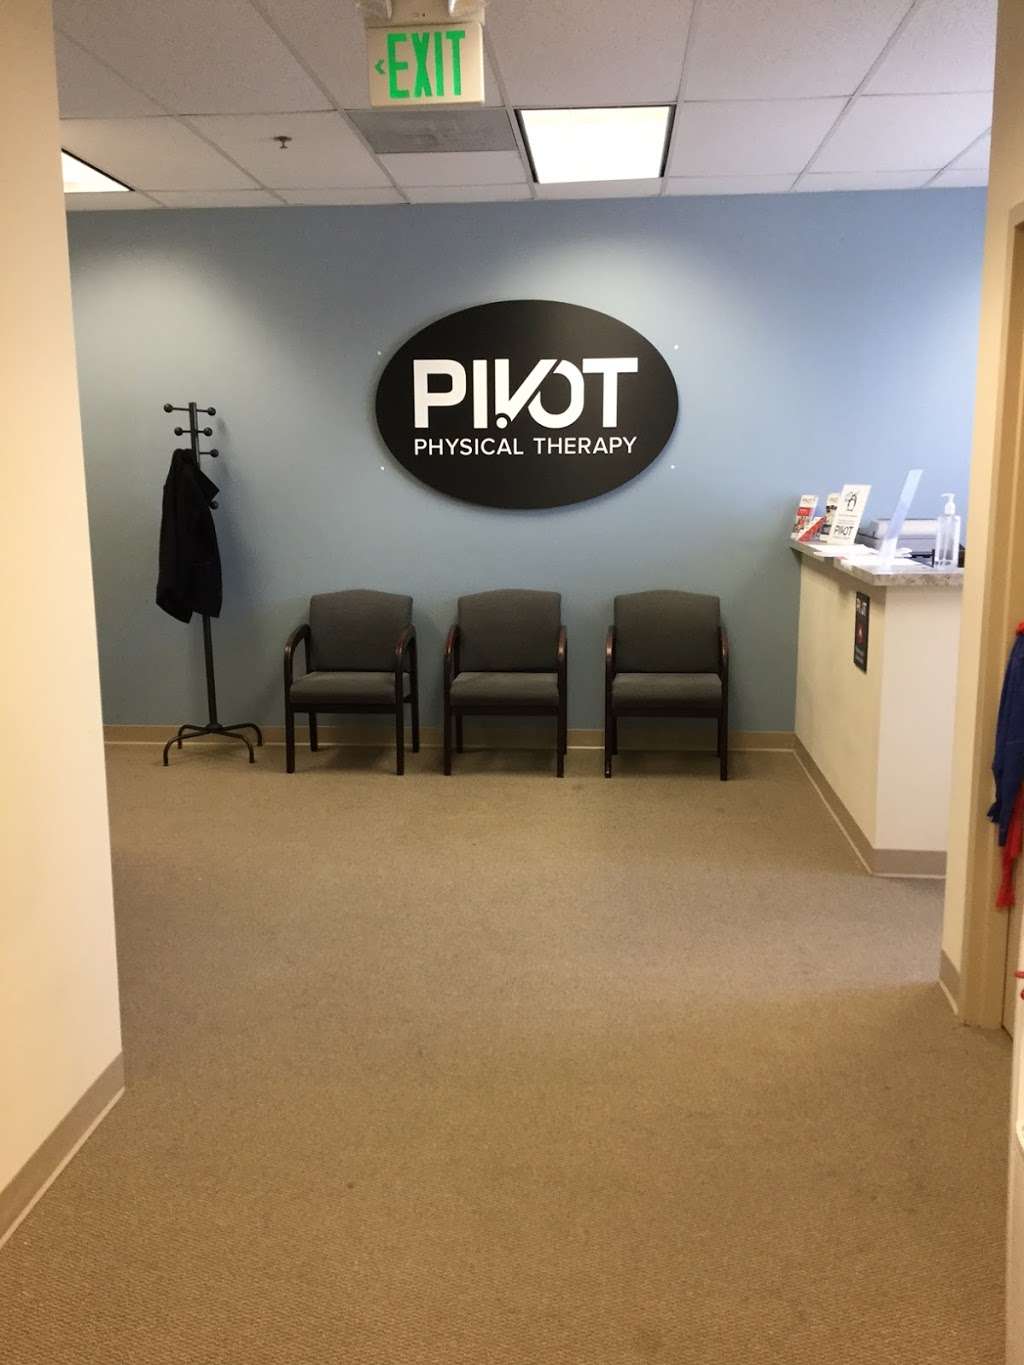 Pivot Physical Therapy | 10995 Owings Mills Blvd #210, Owings Mills, MD 21117 | Phone: (410) 654-2300